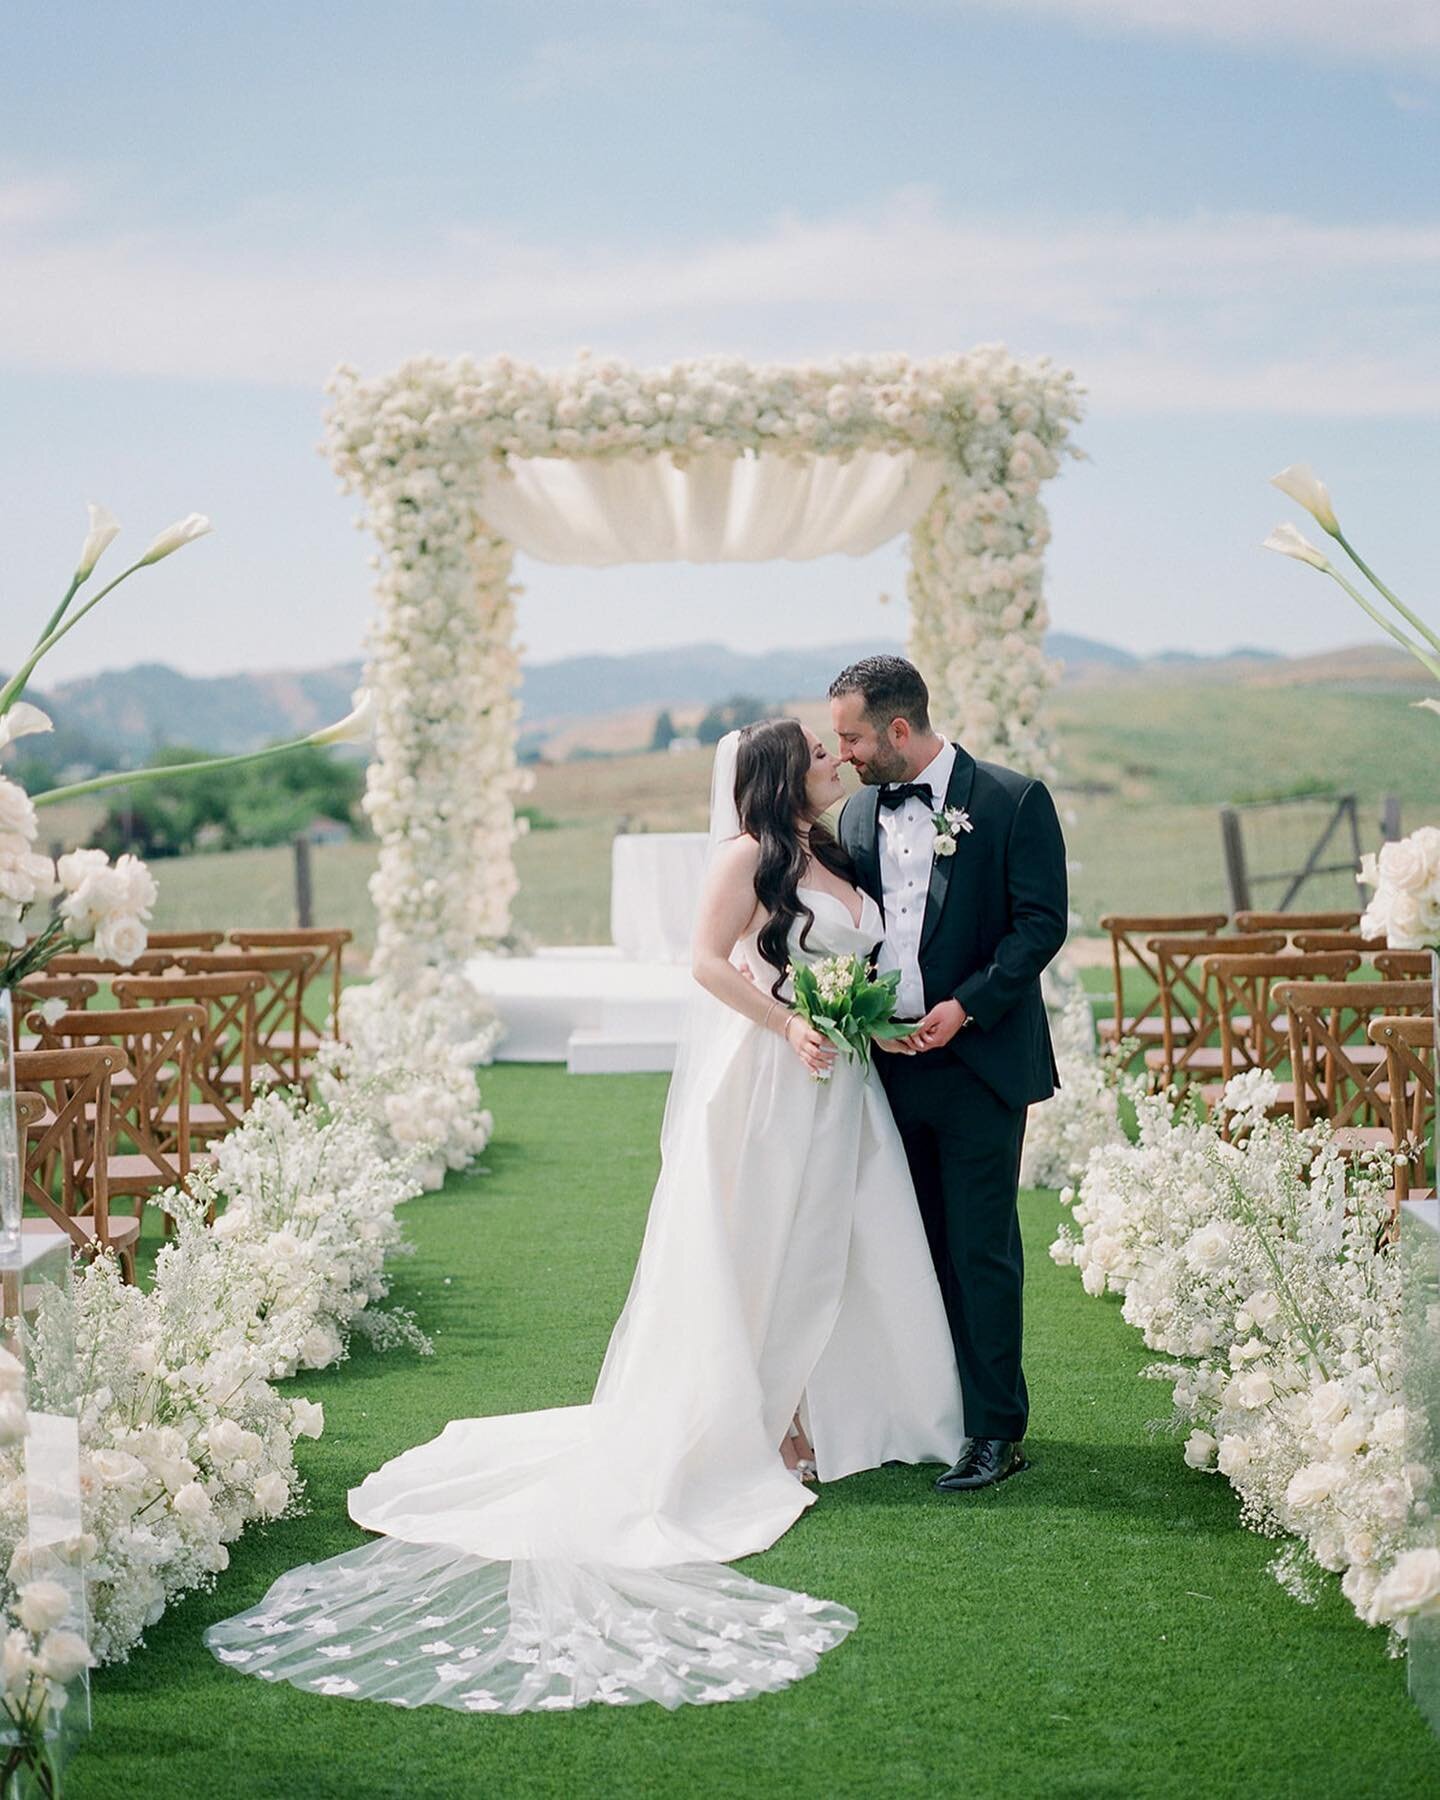 Lost in a dream of elegance and serenity, we celebrate love in Napa Valley, where breathtaking views painted the perfect backdrop. They exchanged vows under a magnificent canopy of all white flowers, creating a fairytale-like atmosphere.

Planning + 